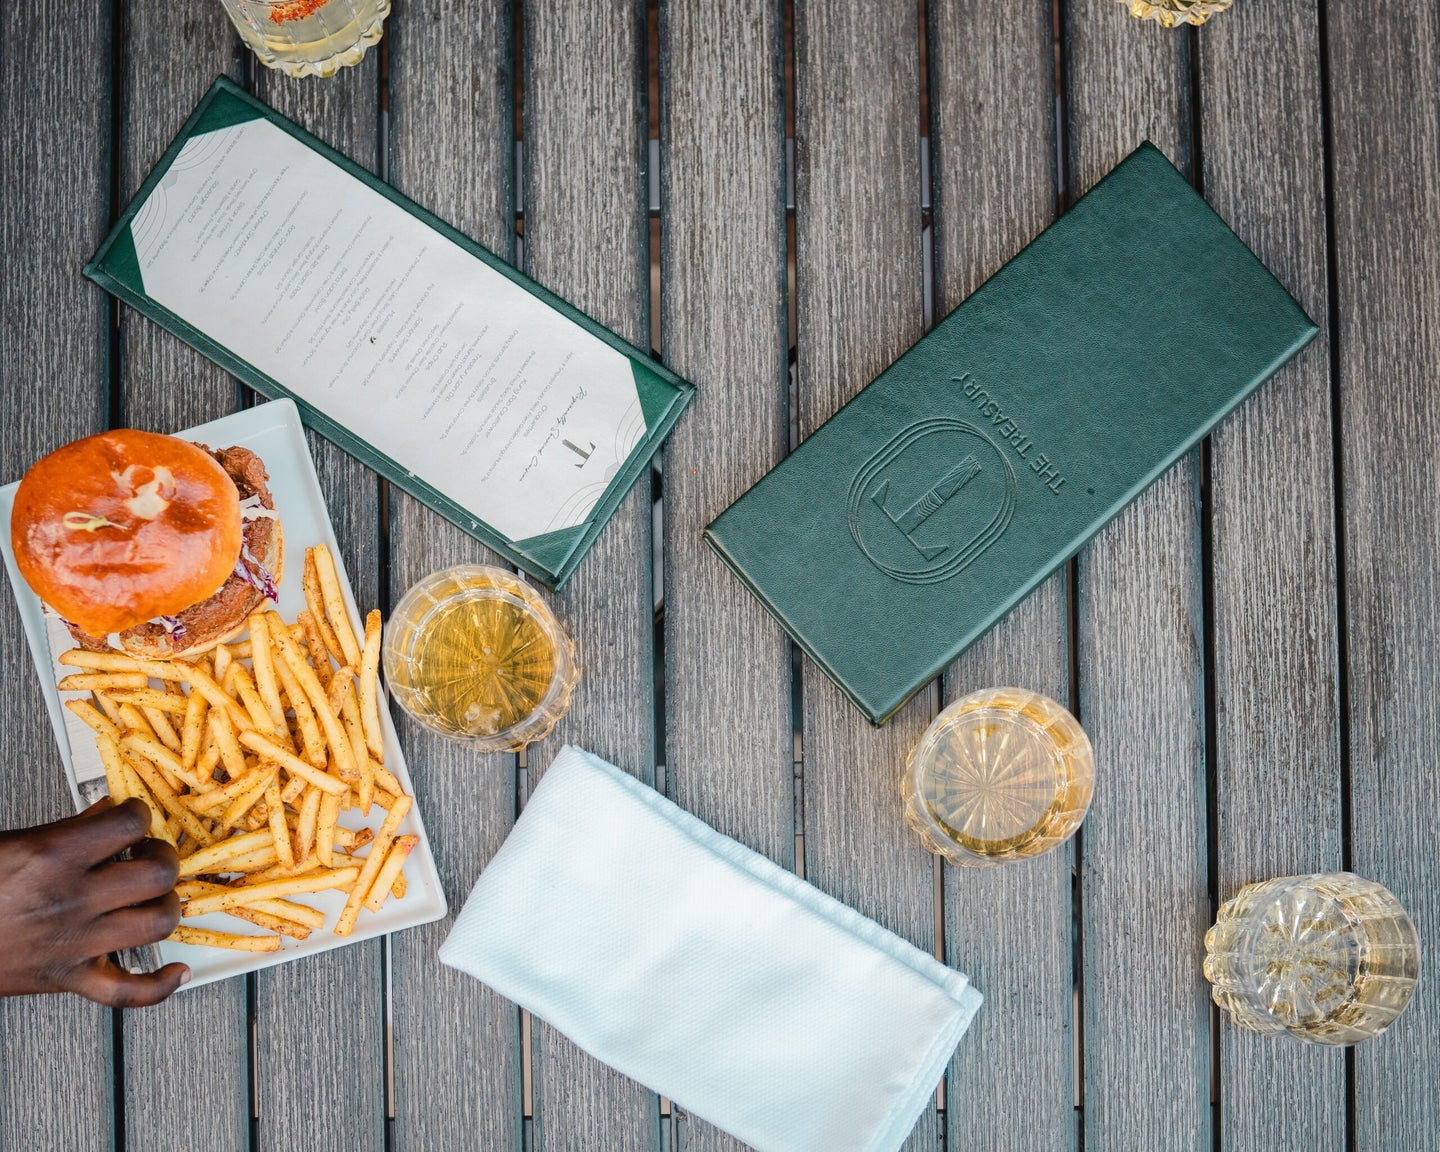 French fries and food menus on dining table.